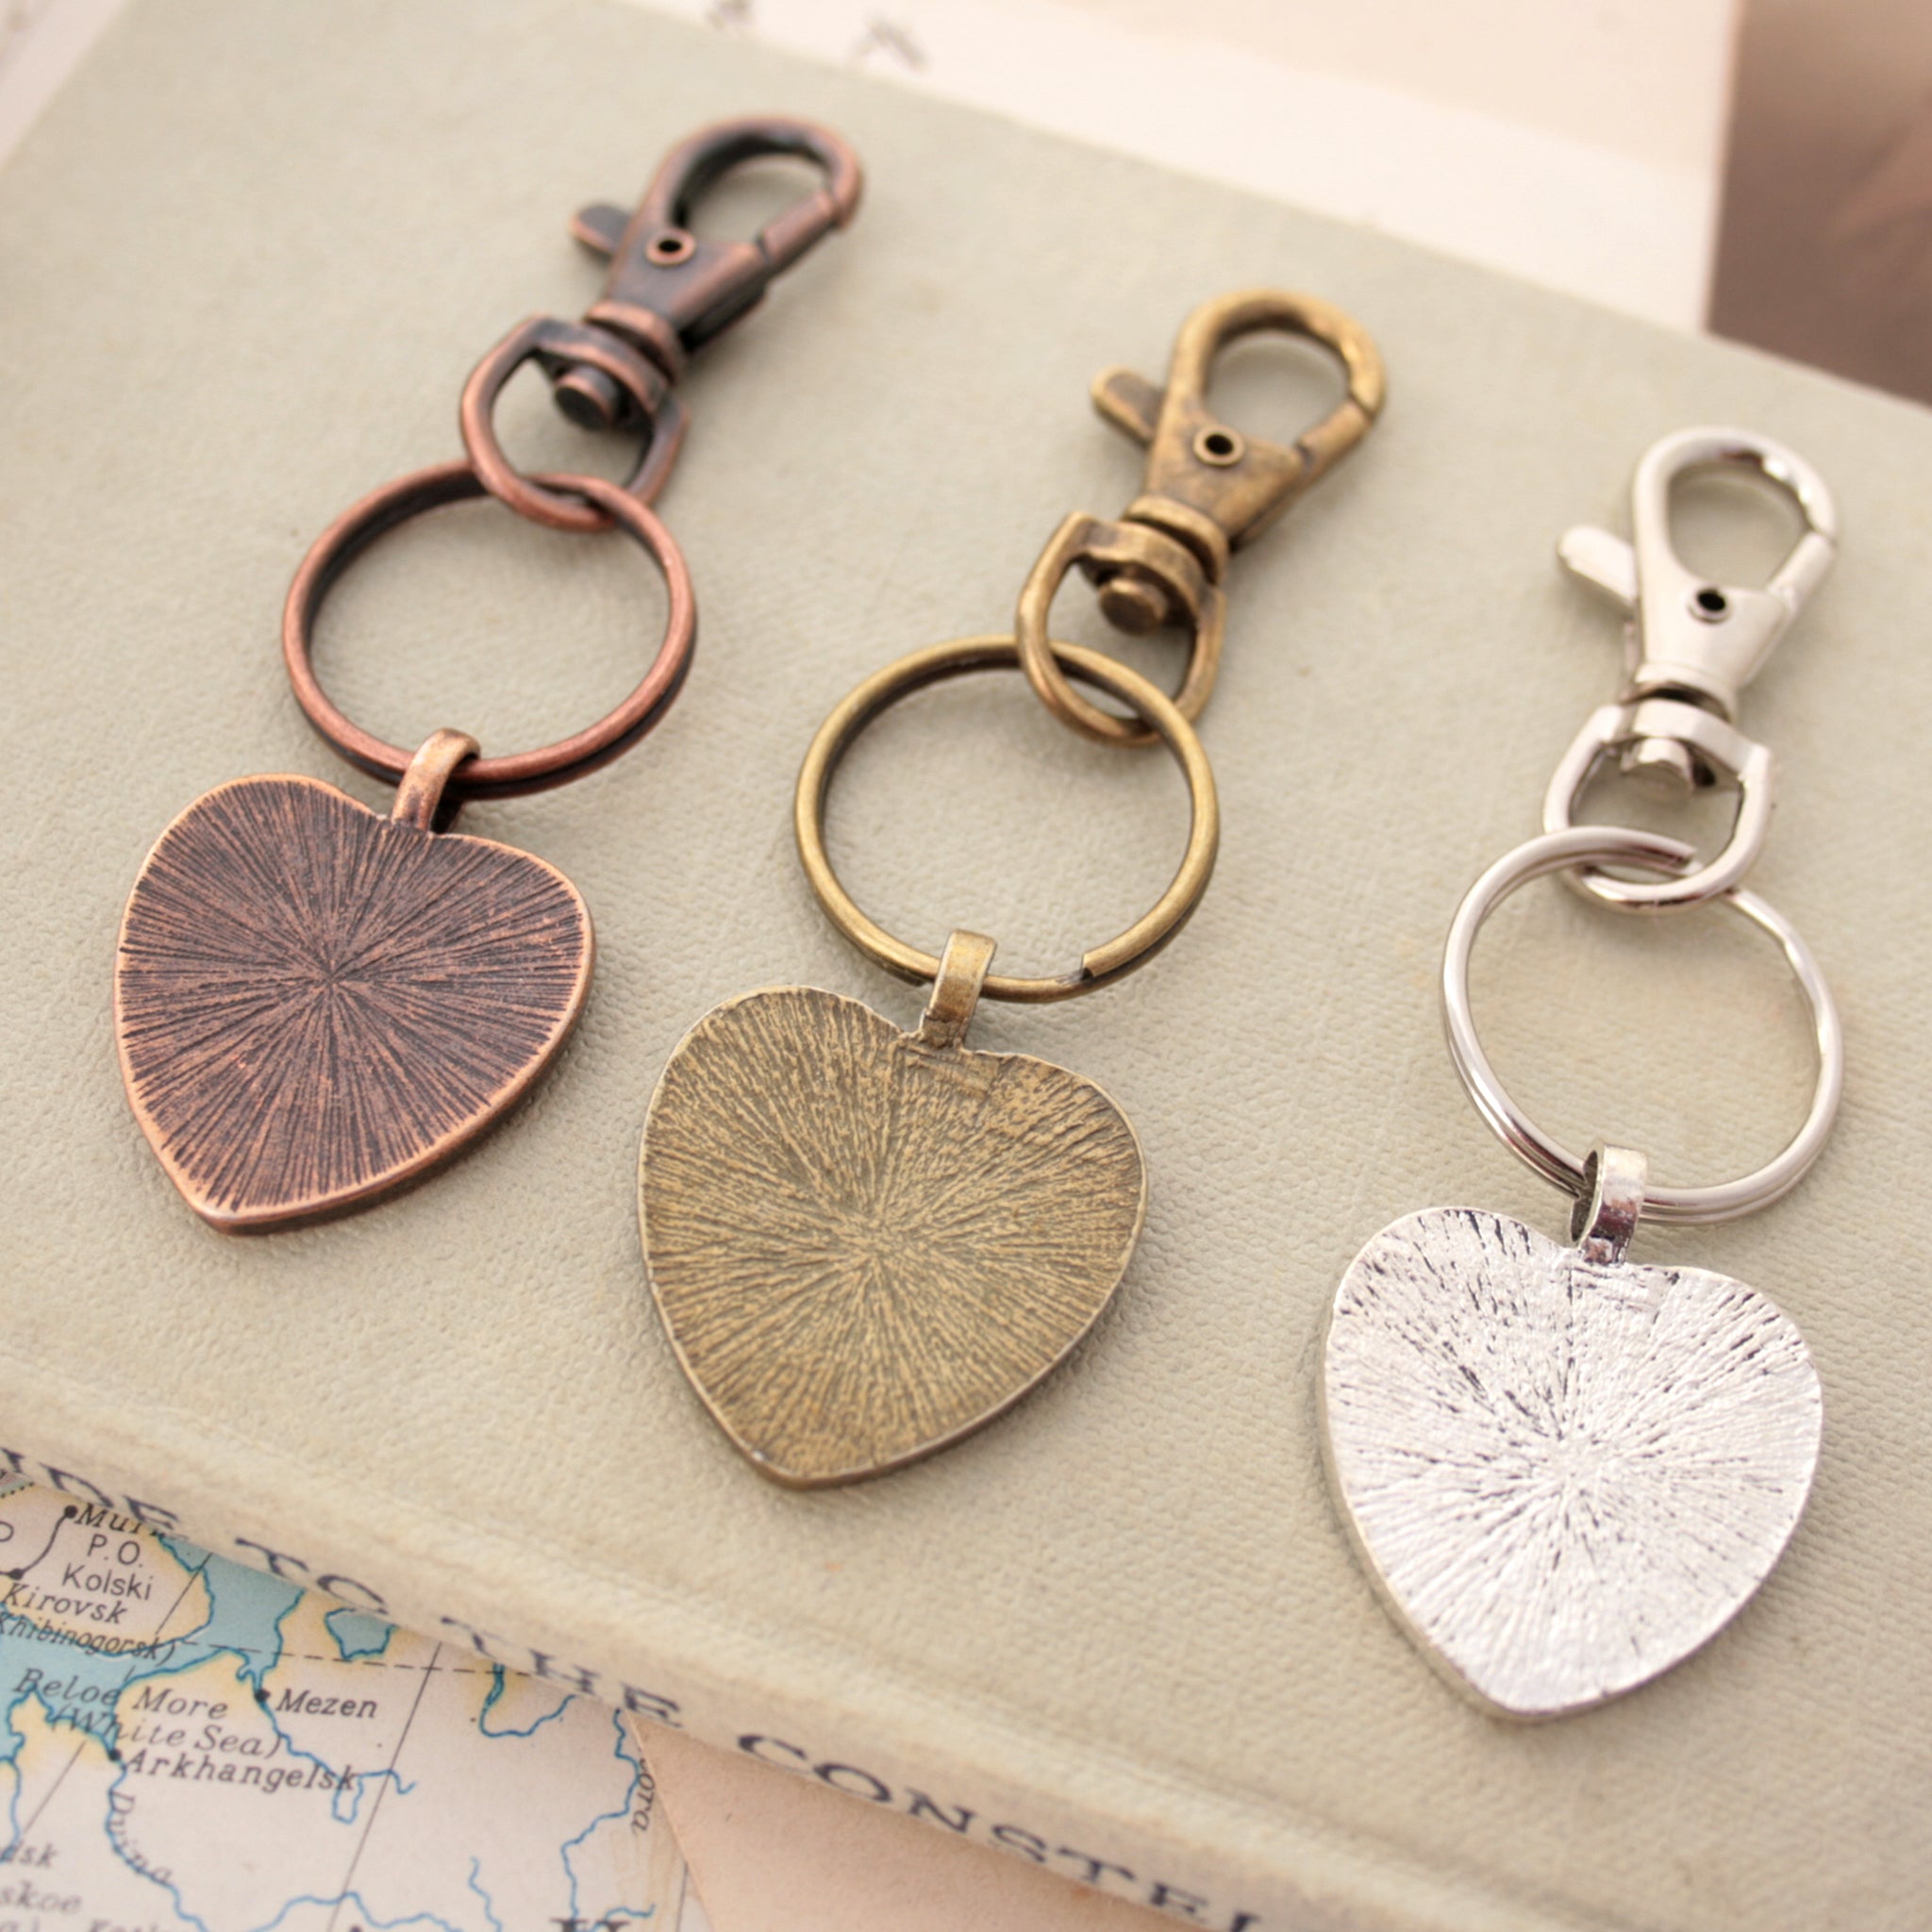 Copper, bronze and silver tone keychains in heart shape